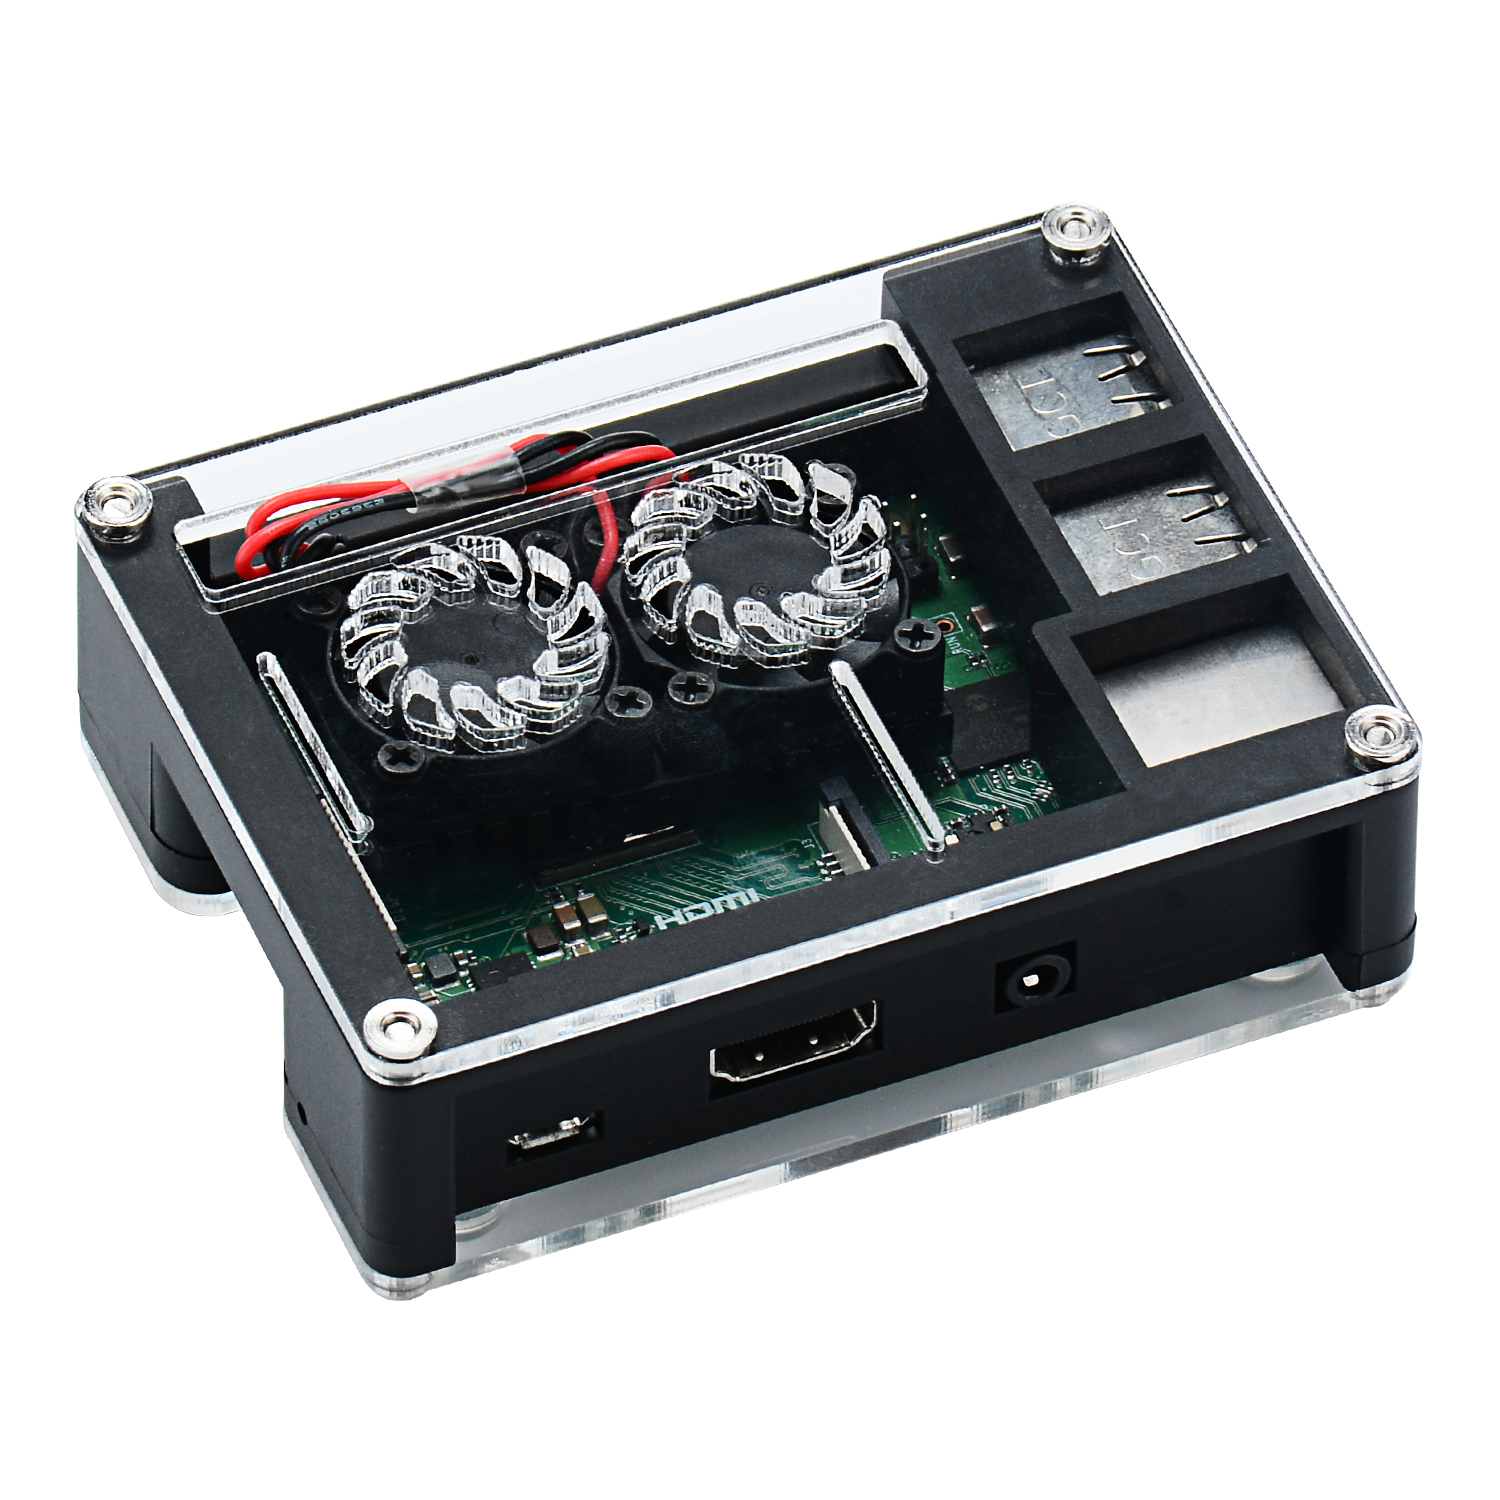 Black-Acrylic-Case-Support-Dual-Cooling-Fans-For-Raspberry-Pi-3B-Board-1411938-6